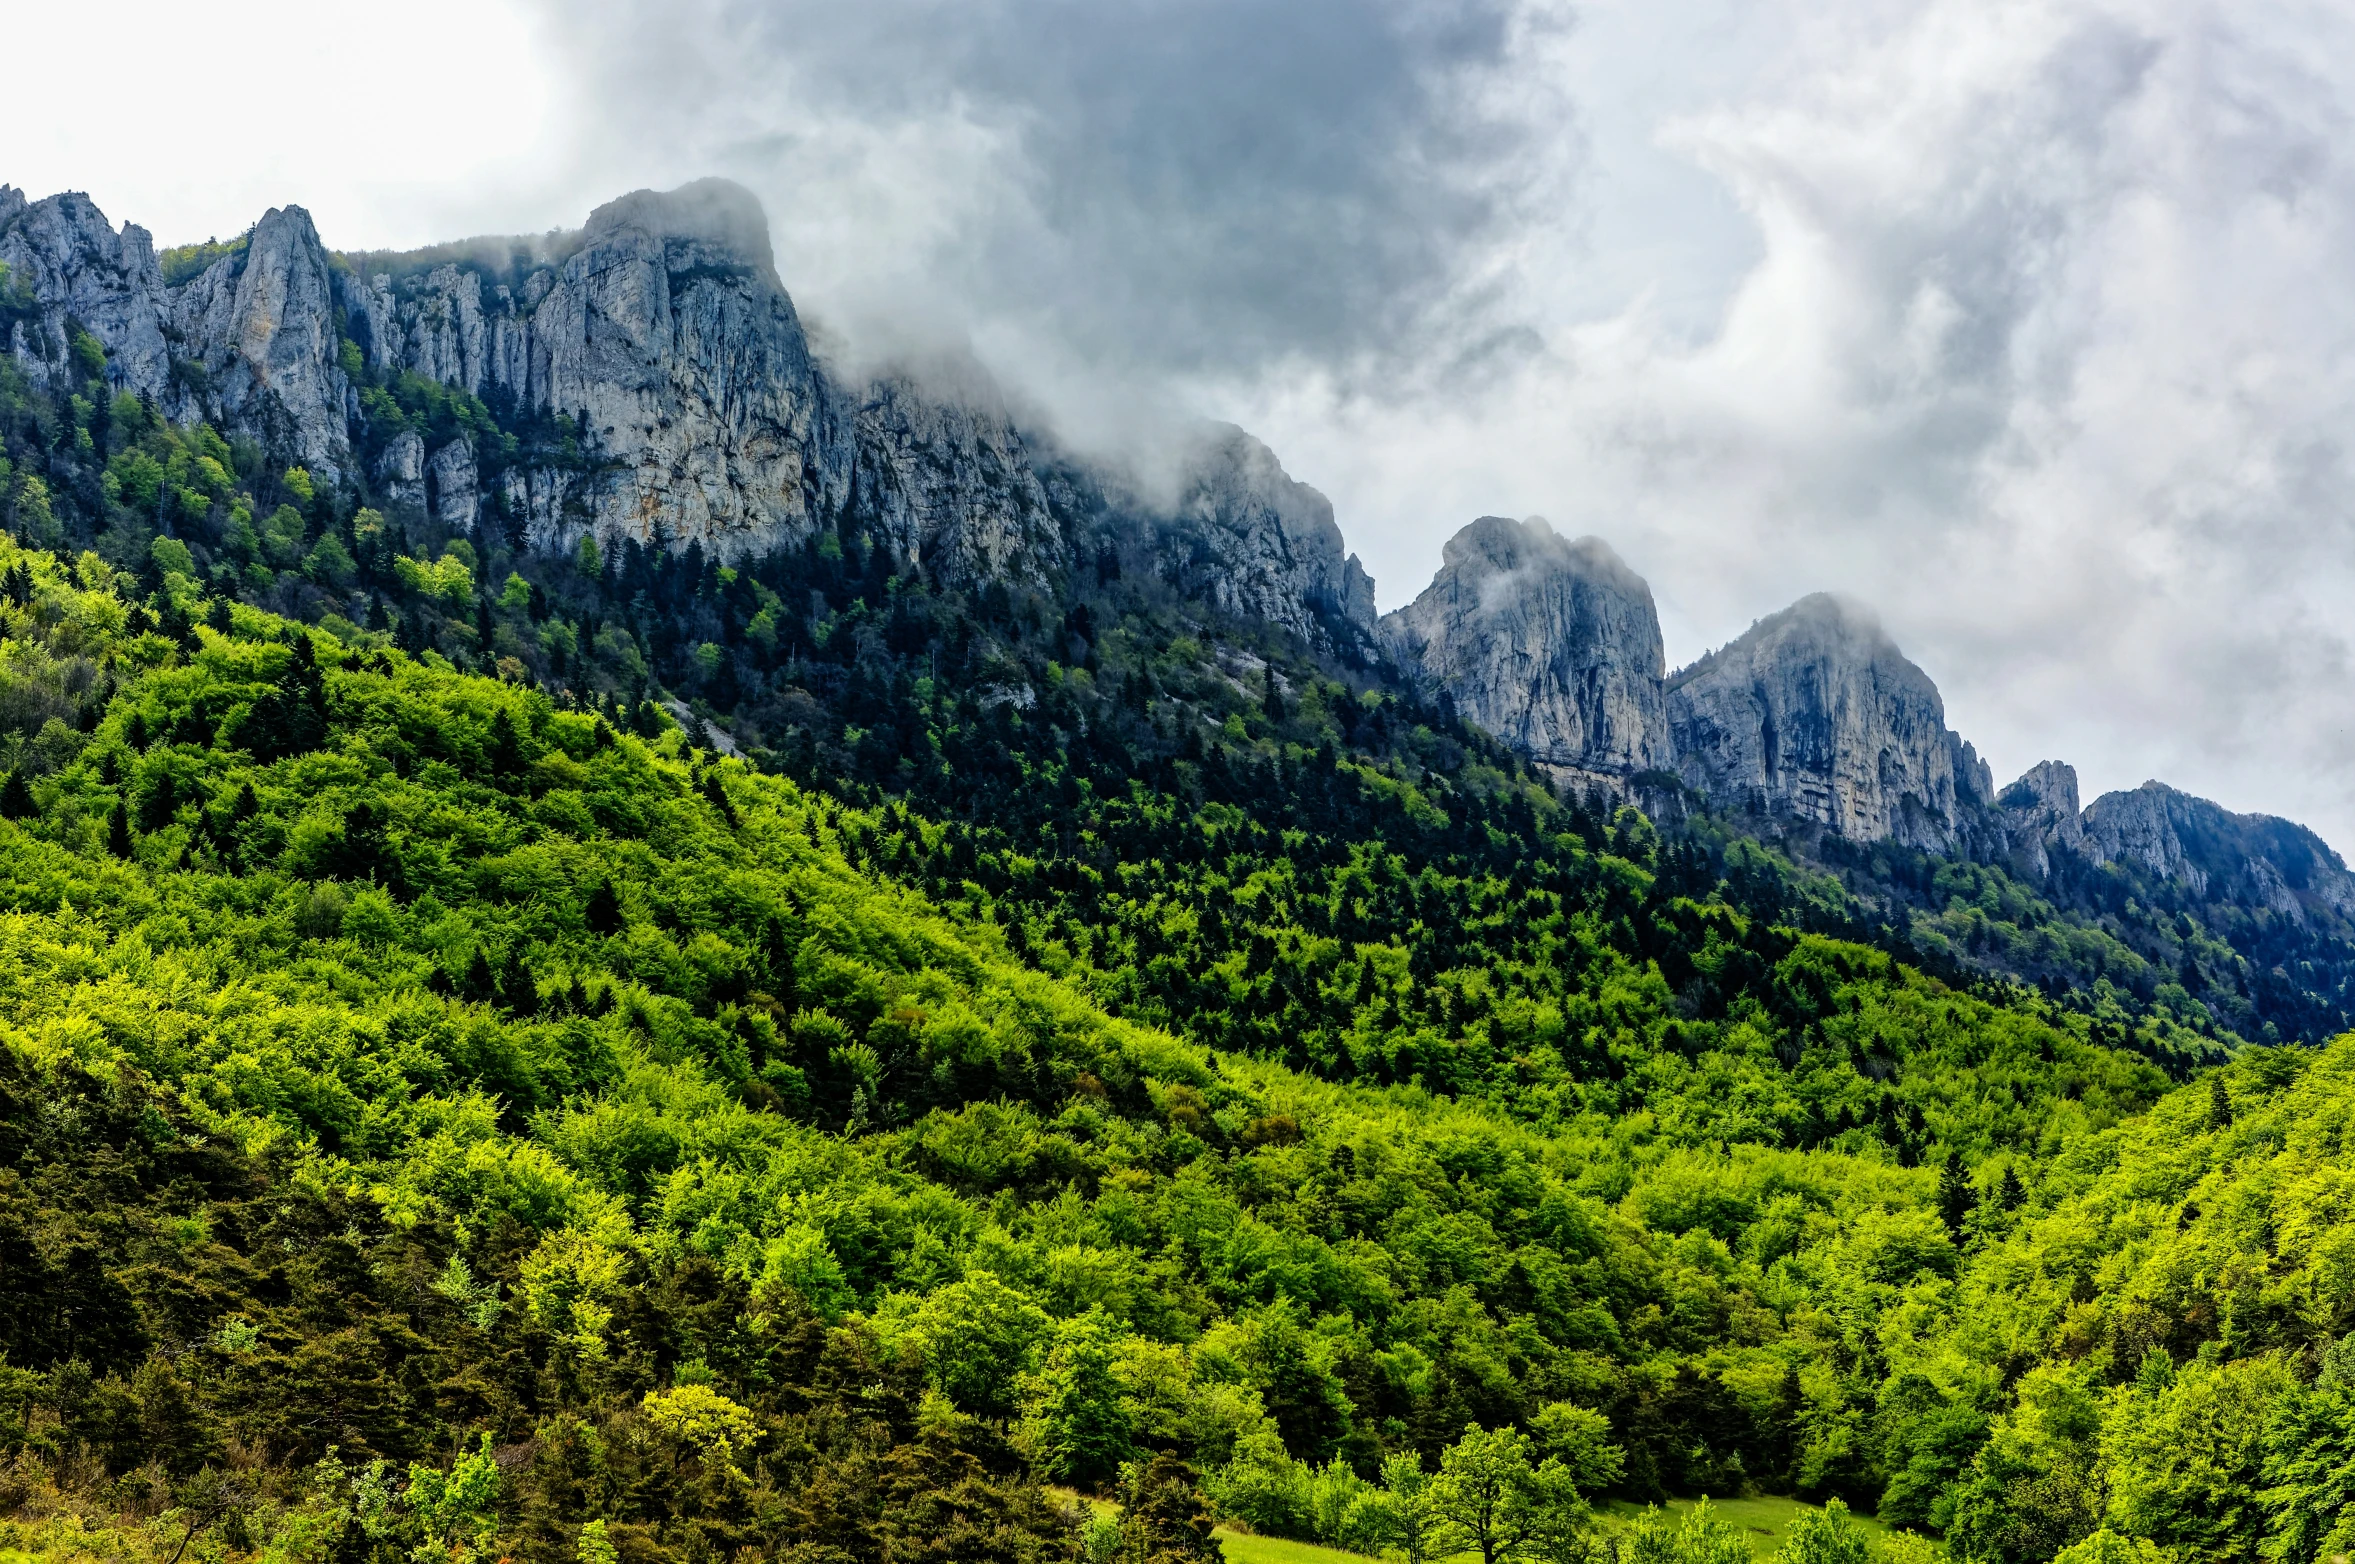 an image of mountains covered in green vegetation